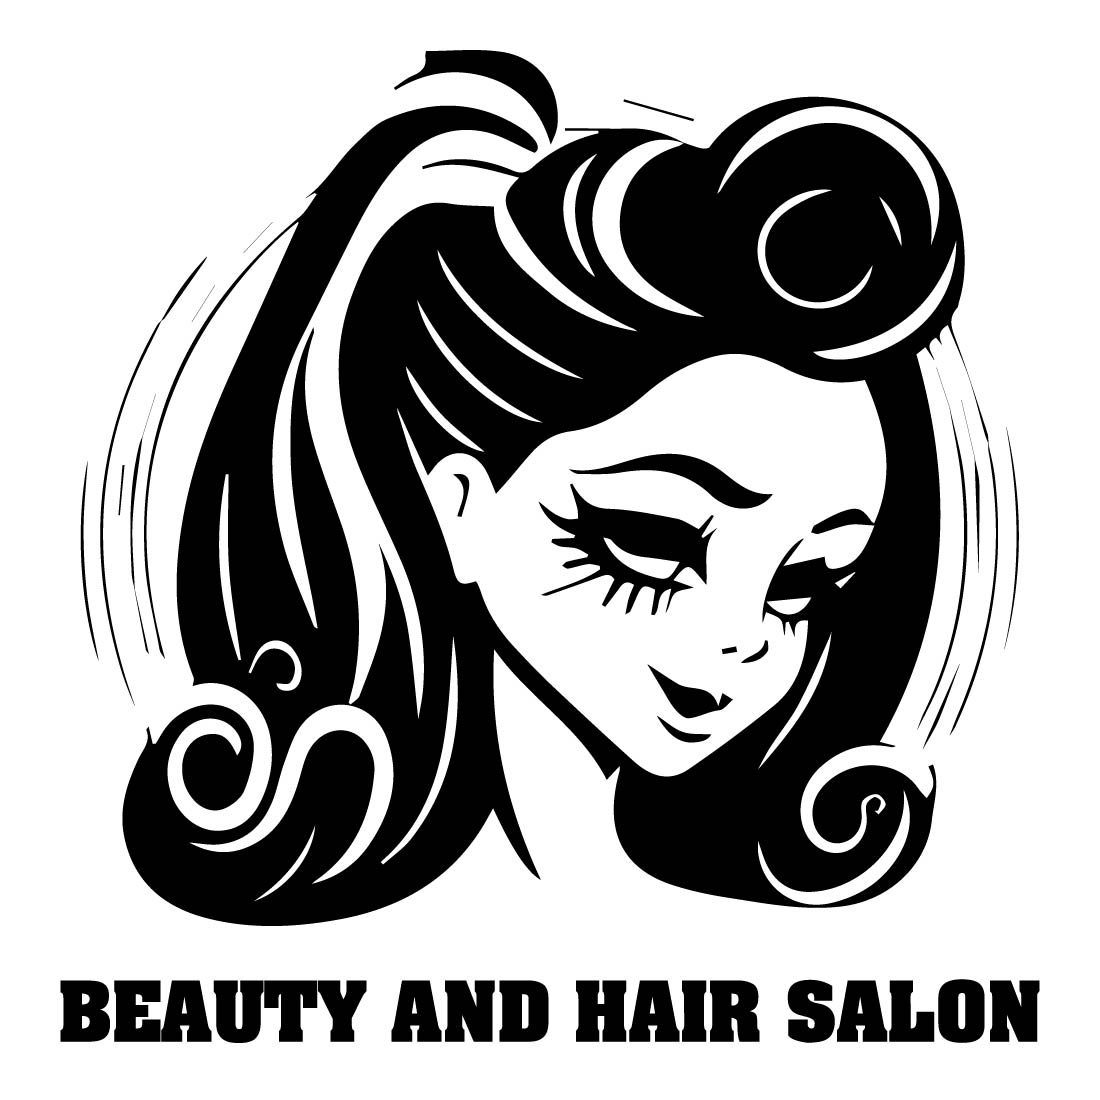 Woman's face with the words beauty and hair salon.